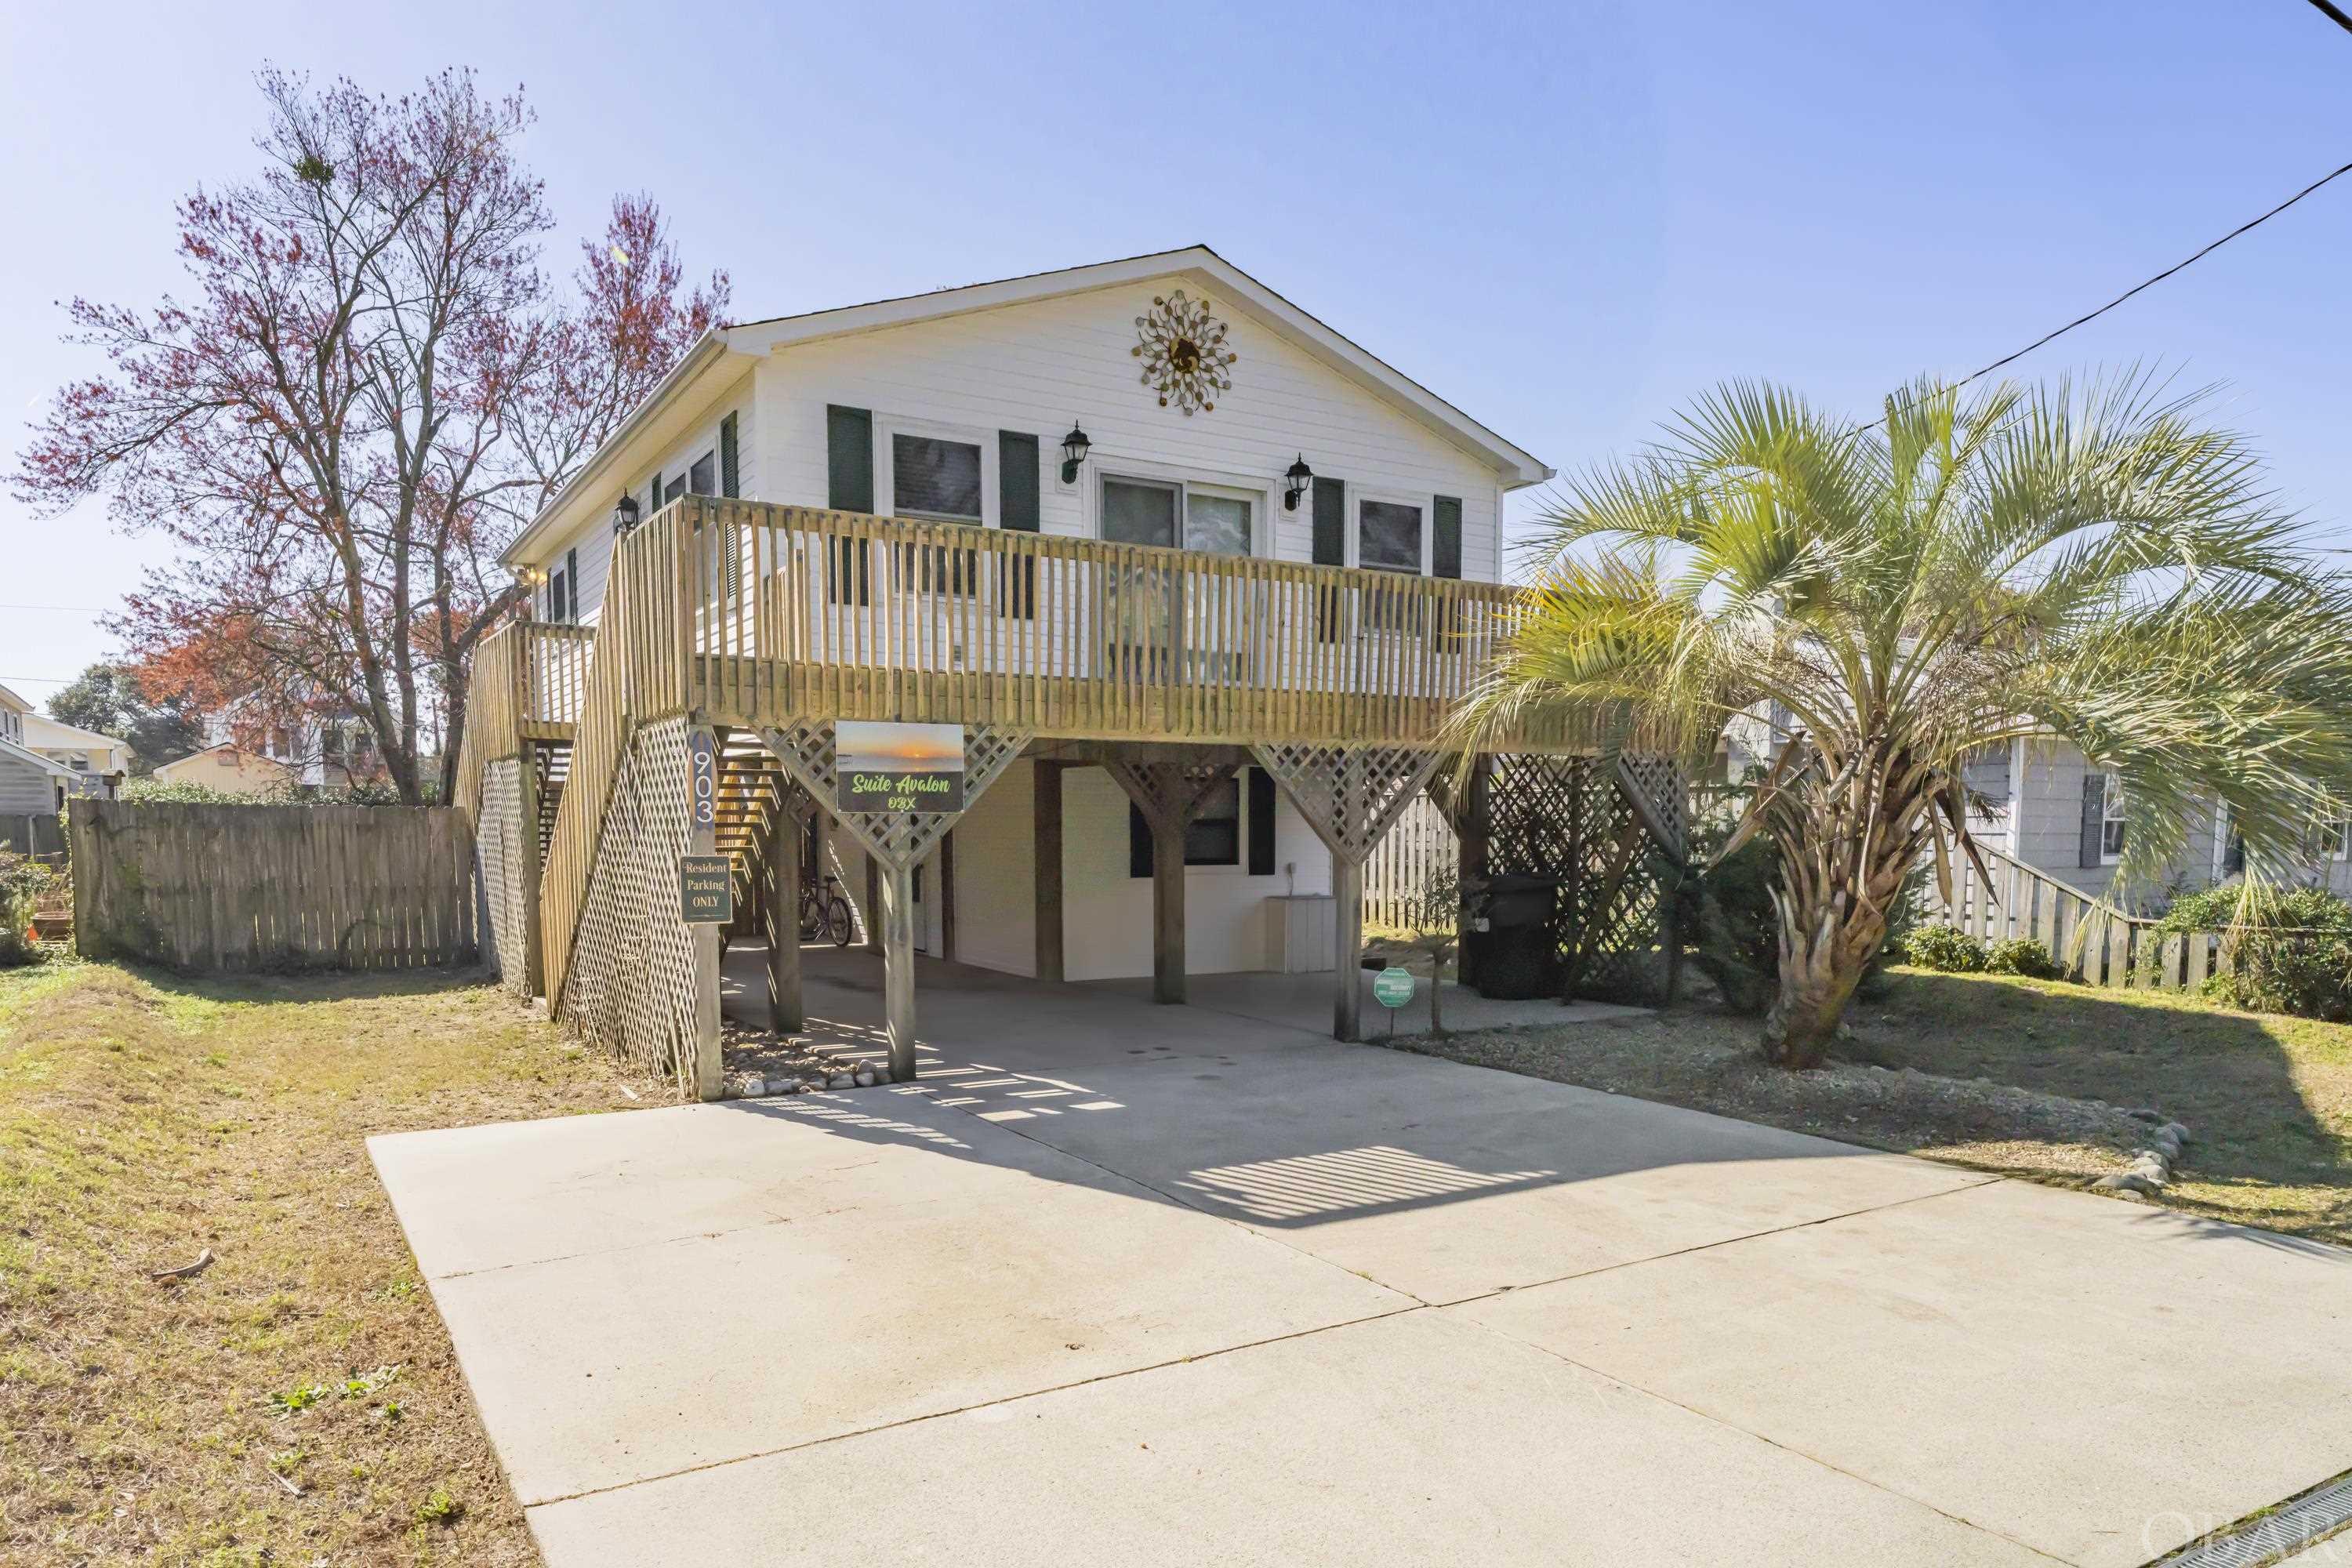 903 Avalon Drive, Kill Devil Hills, NC 27948-8233, 2 Bedrooms Bedrooms, ,2 BathroomsBathrooms,Residential,For sale,Avalon Drive,124993